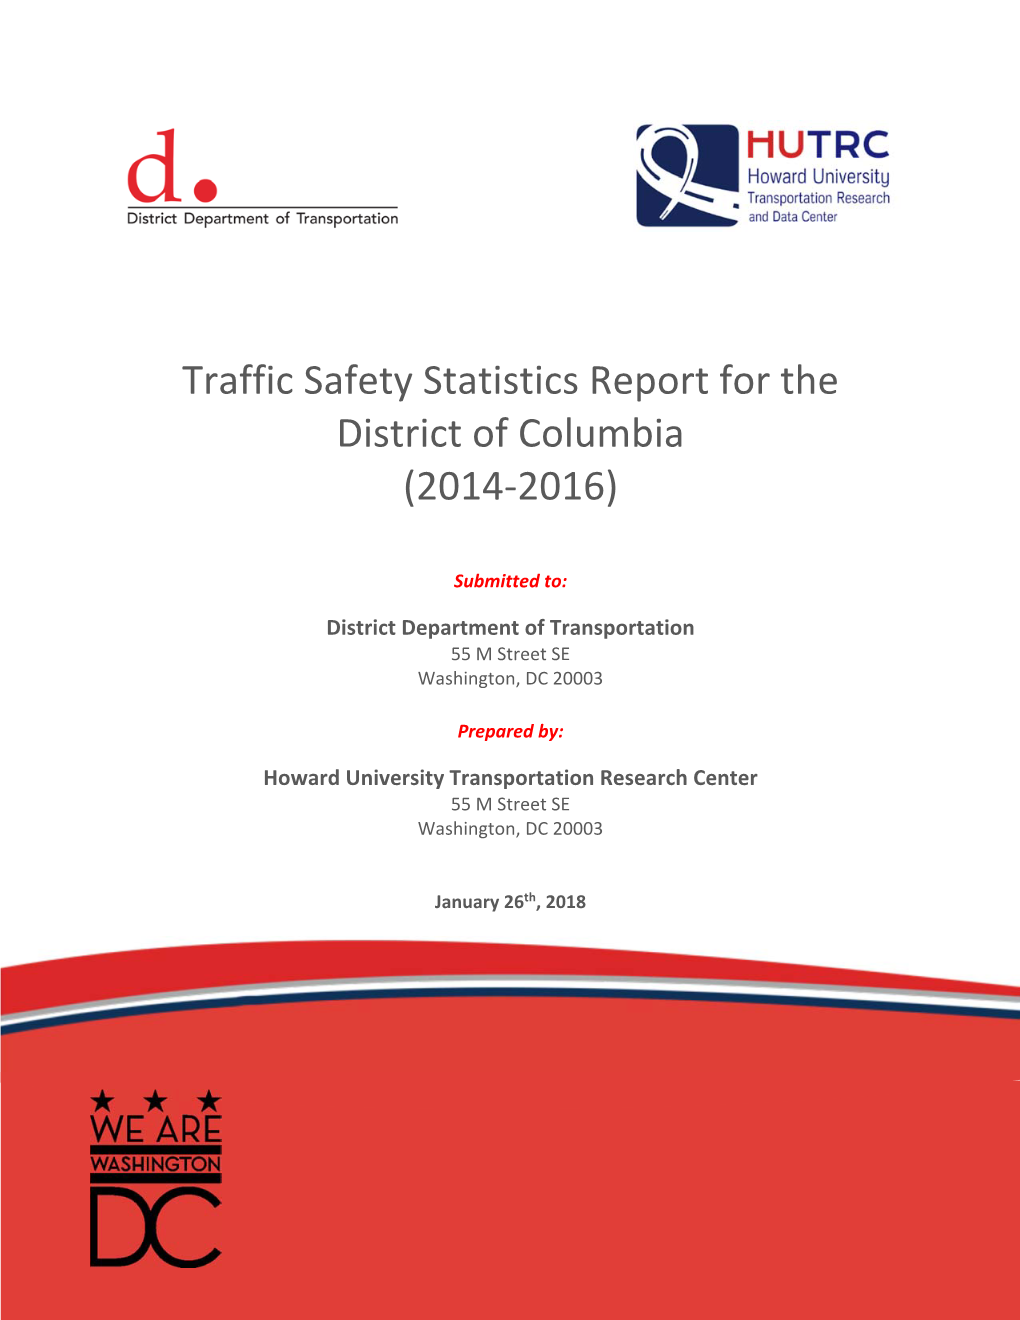 Traffic Safety Statistics Report for the District of Columbia (2014-2016)